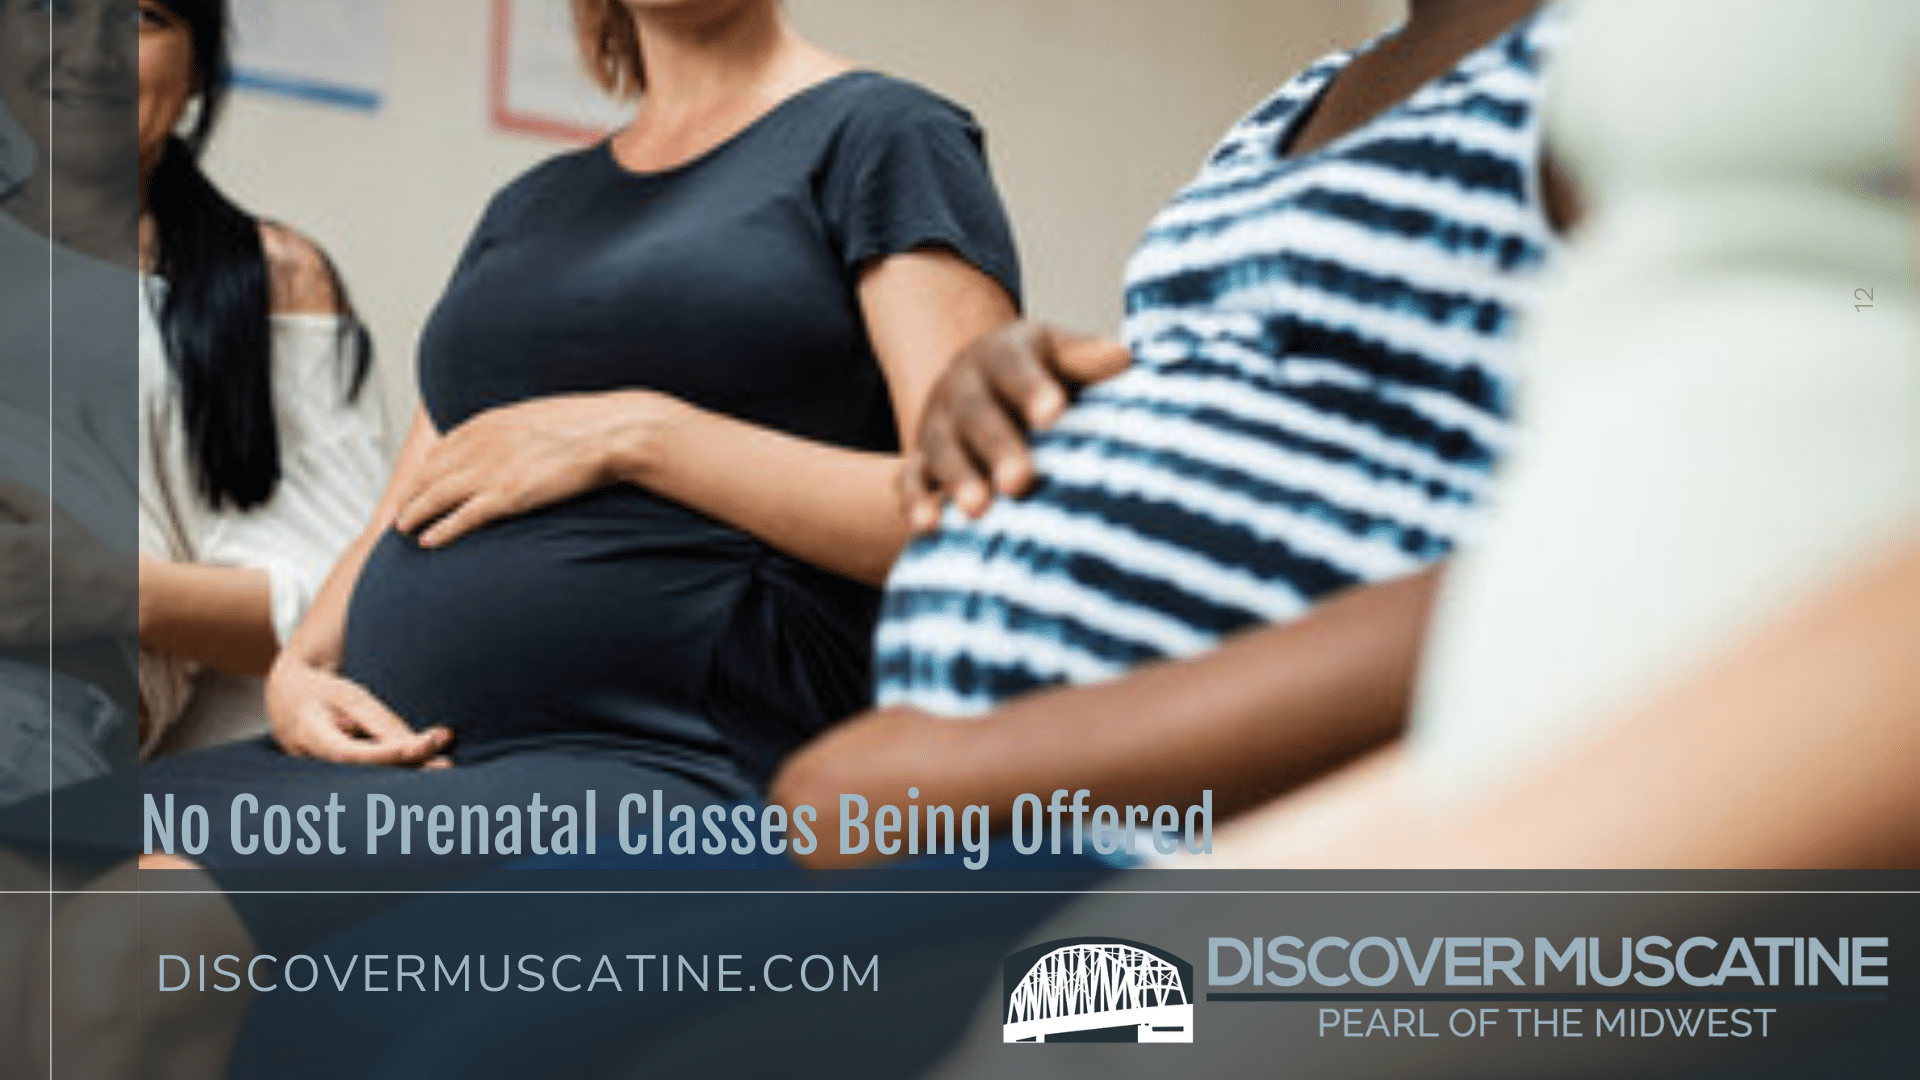 No Cost Prenatal Classes Being Offered